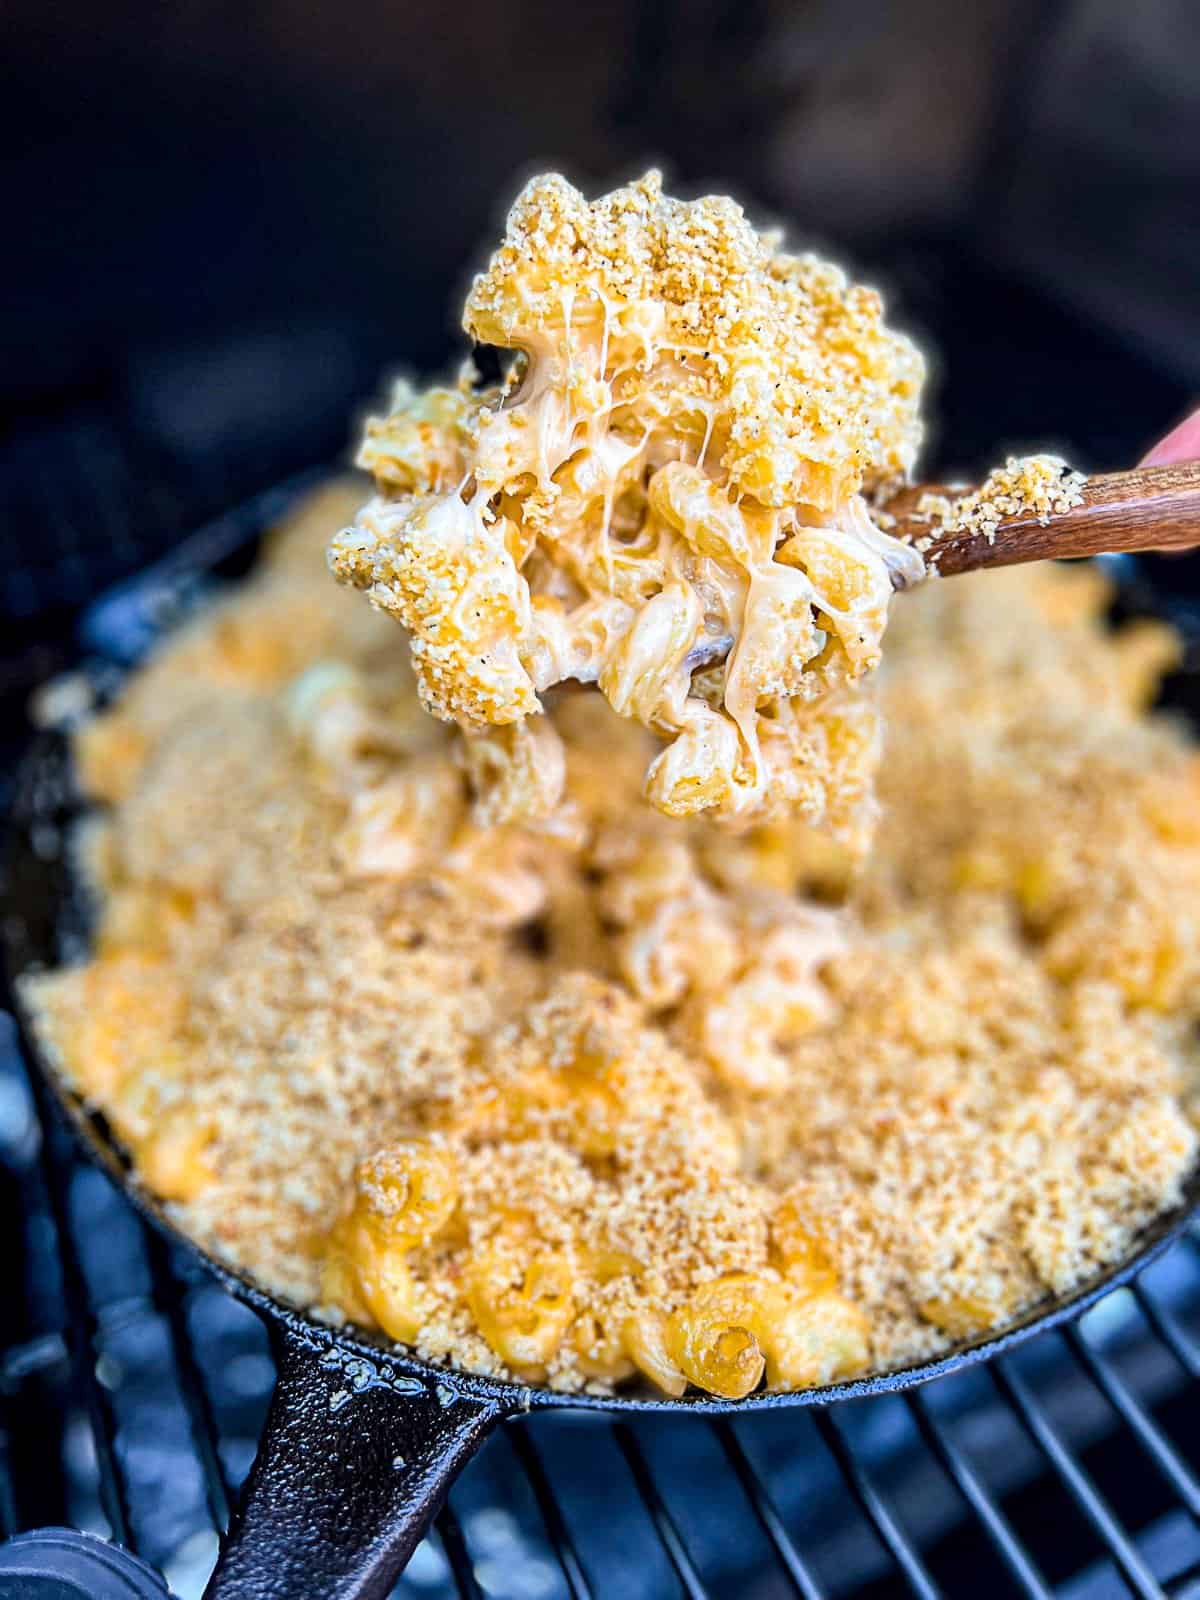 Best Traeger Smoked Mac And Cheese With Gouda And Cavatelli Noodles